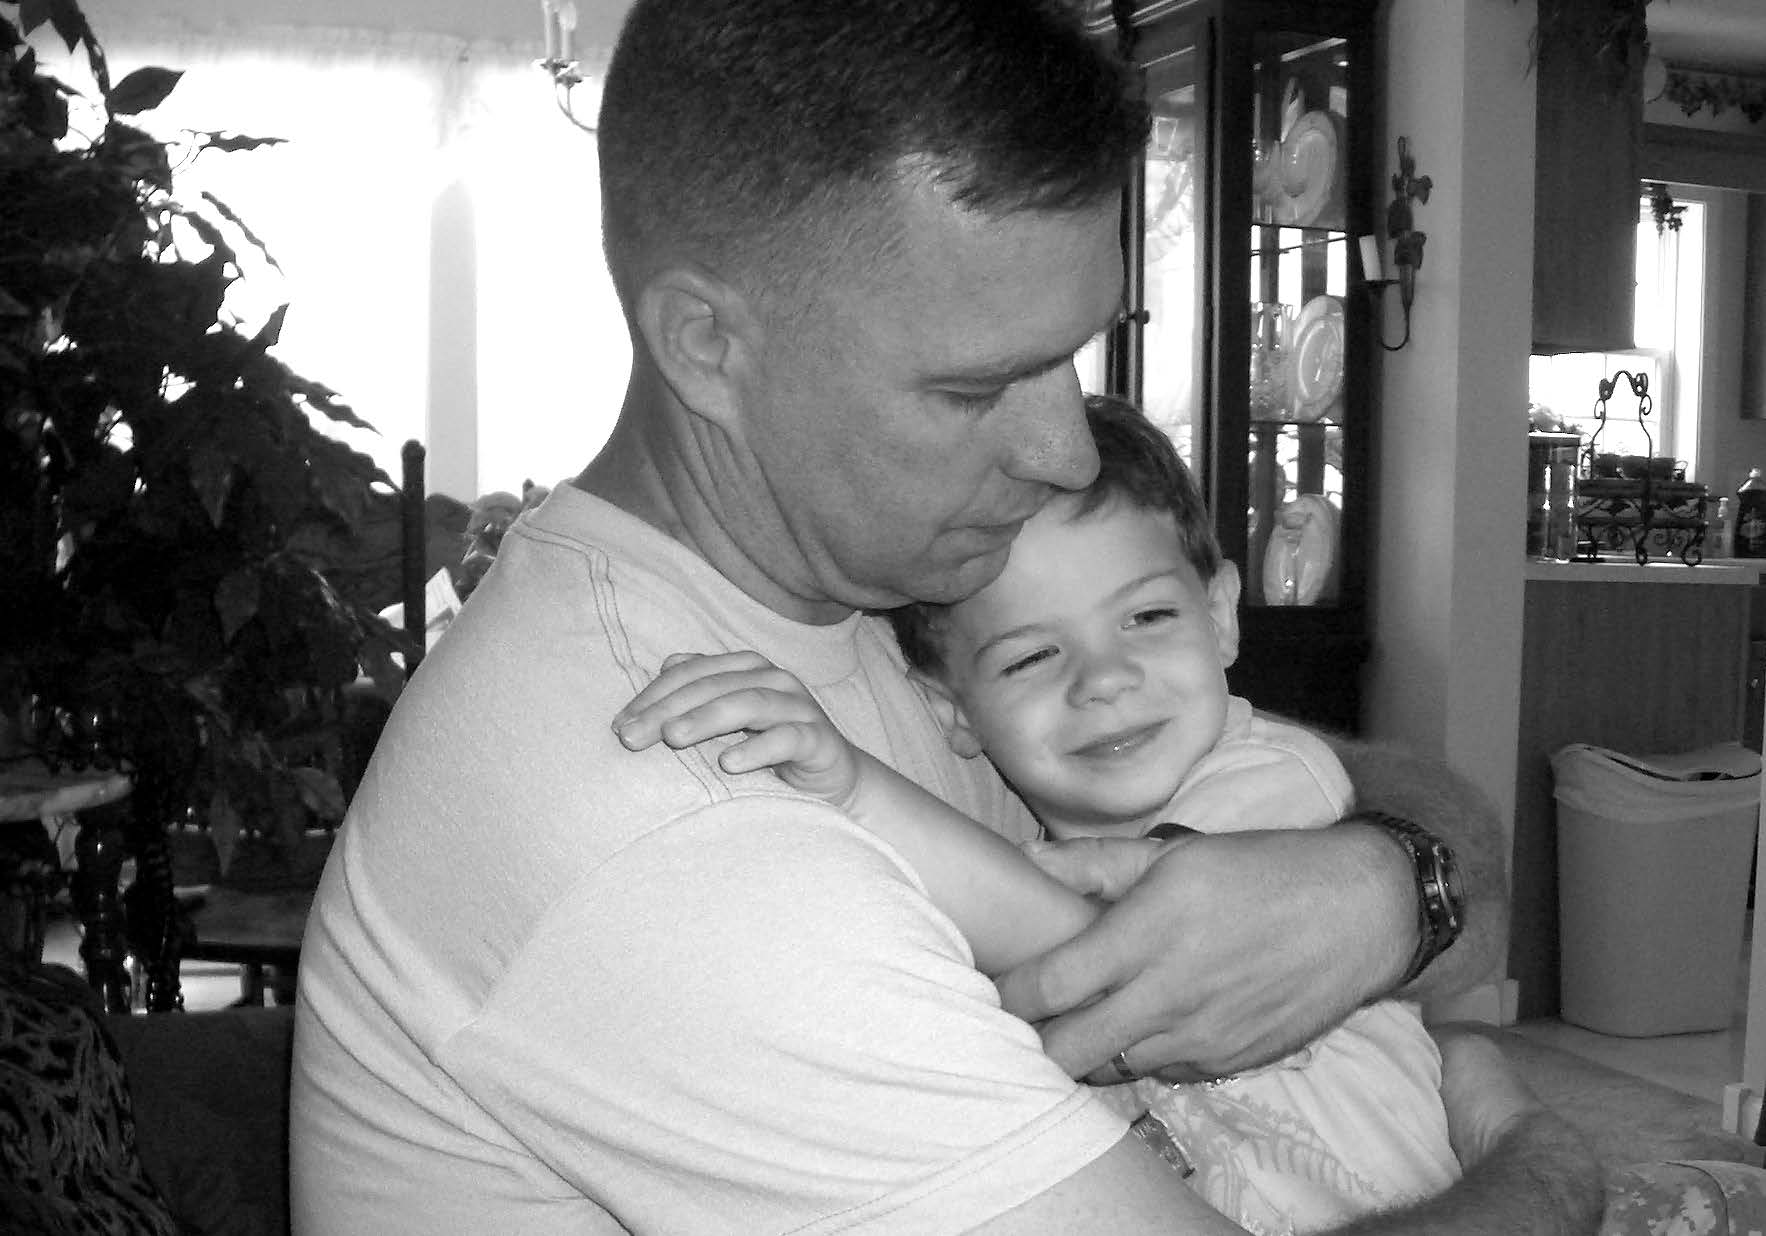 Jon Petty receives a last hug from his son Ryan prior to deploying to Afghanistan. Courtesy of Jon Petty.